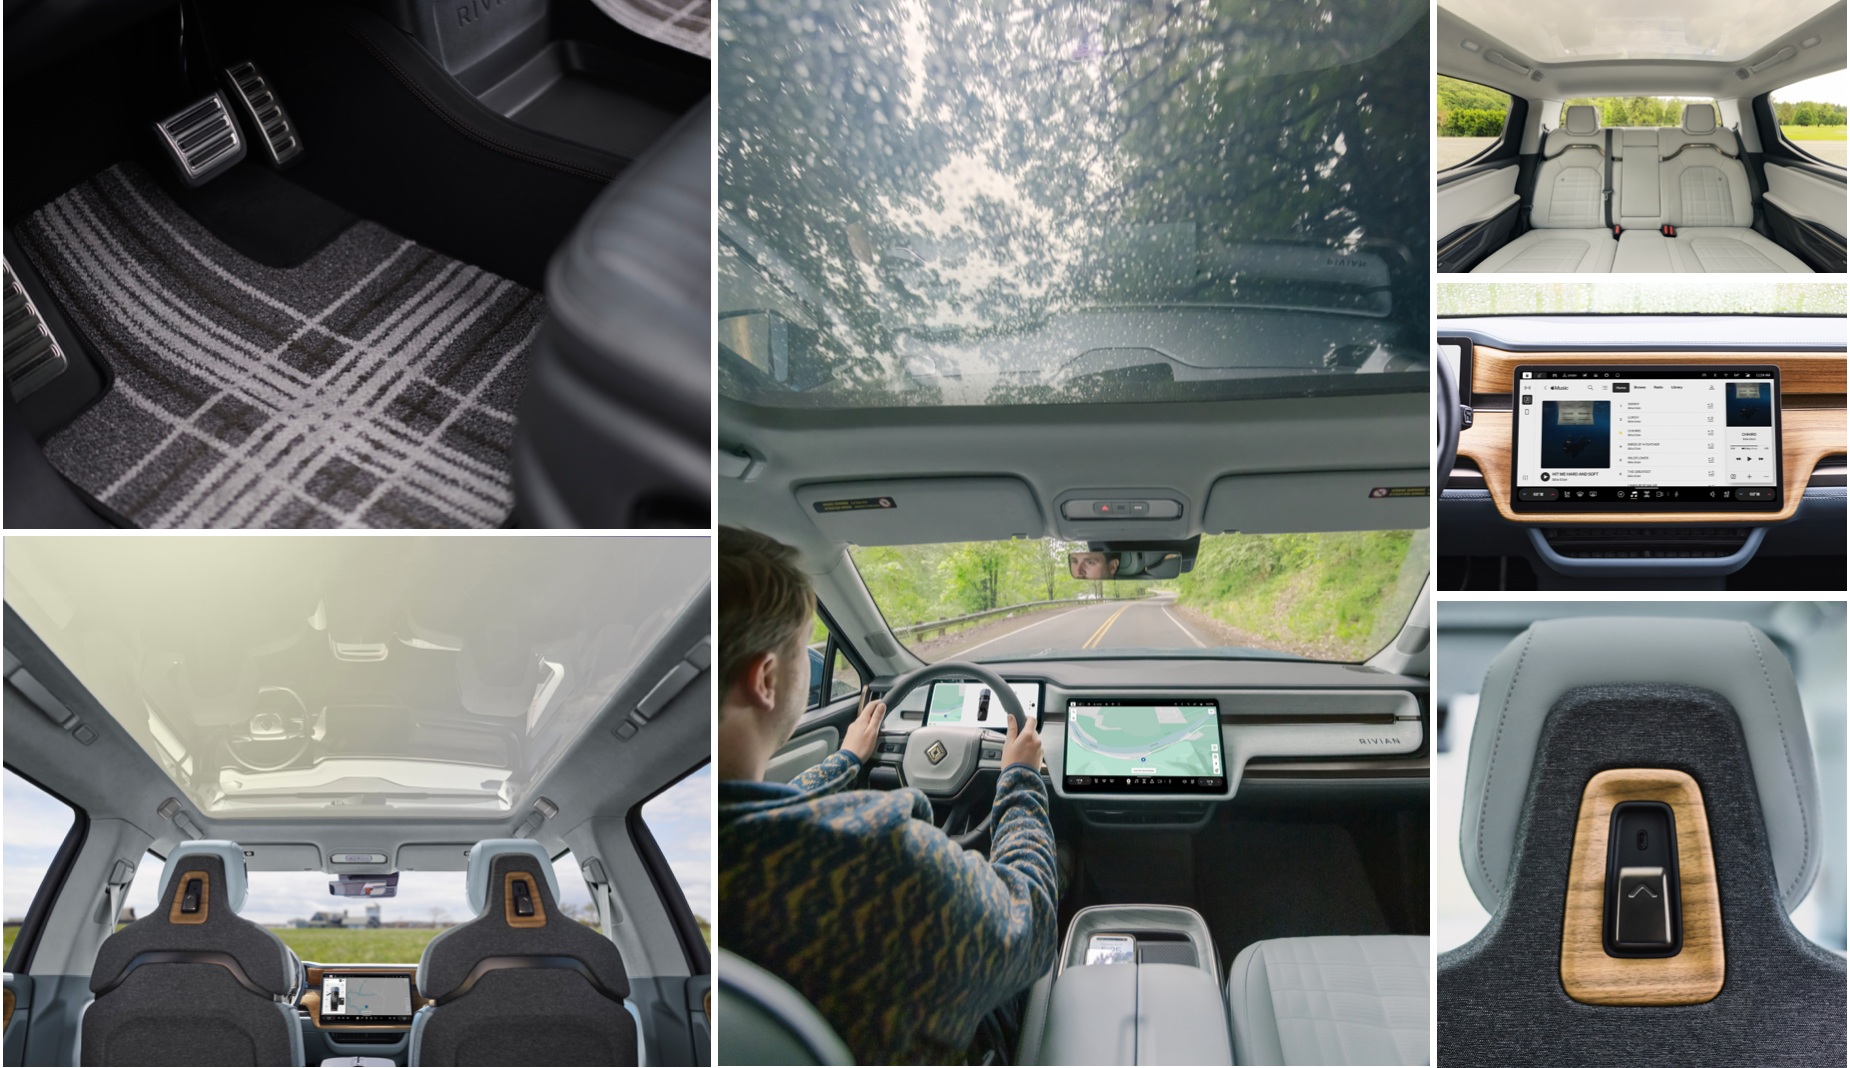 six photos showing the interior of the rivian cars, including seats, infotainment, and sun roof